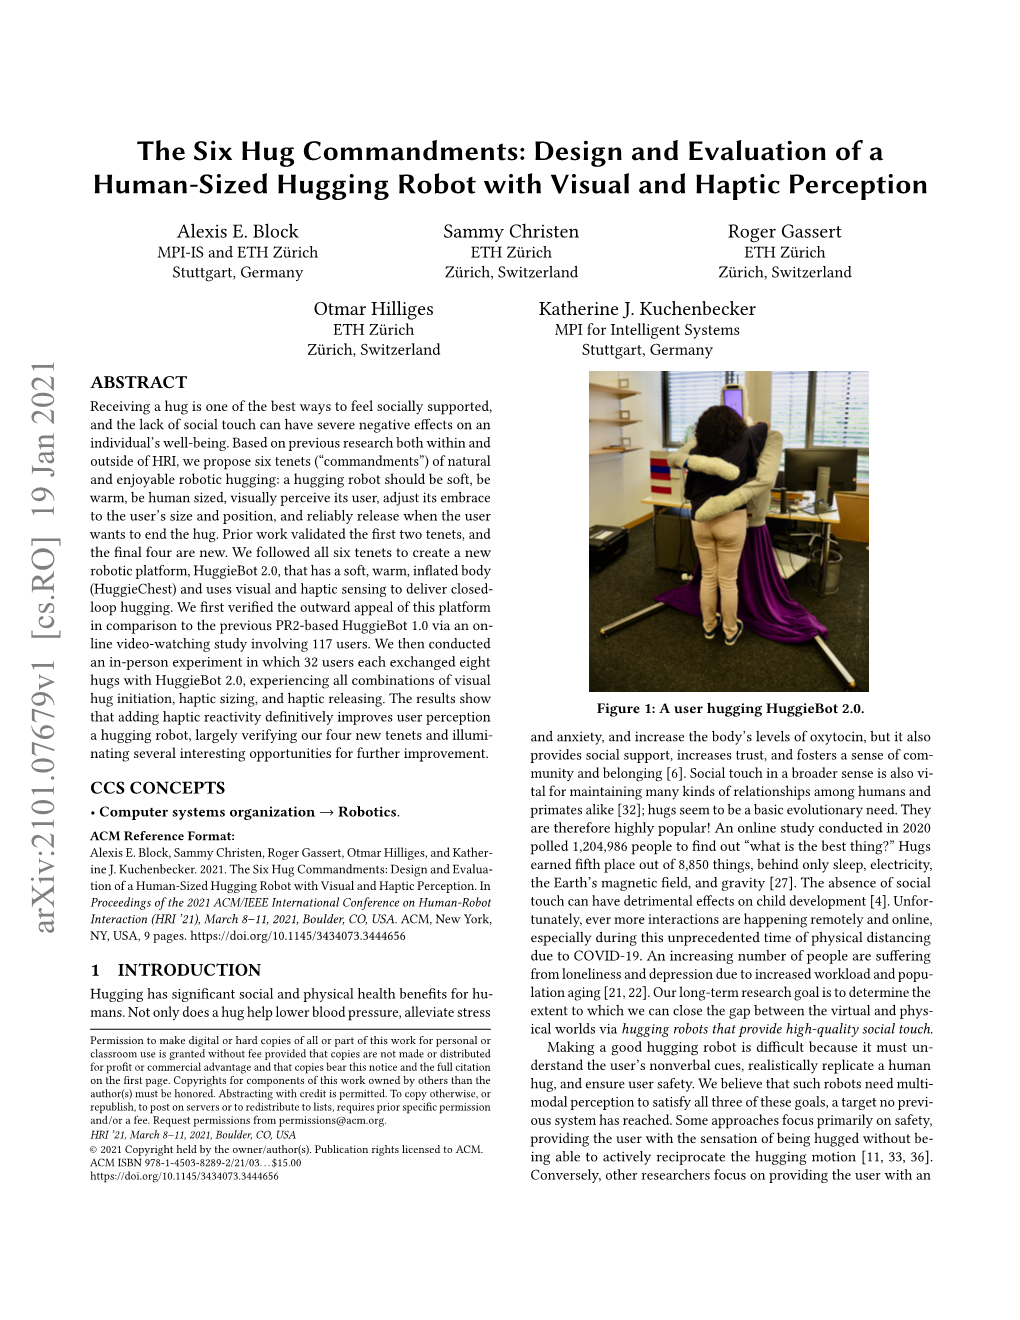 The Six Hug Commandments: Design and Evaluation of a Human-Sized Hugging Robot with Visual and Haptic Perception